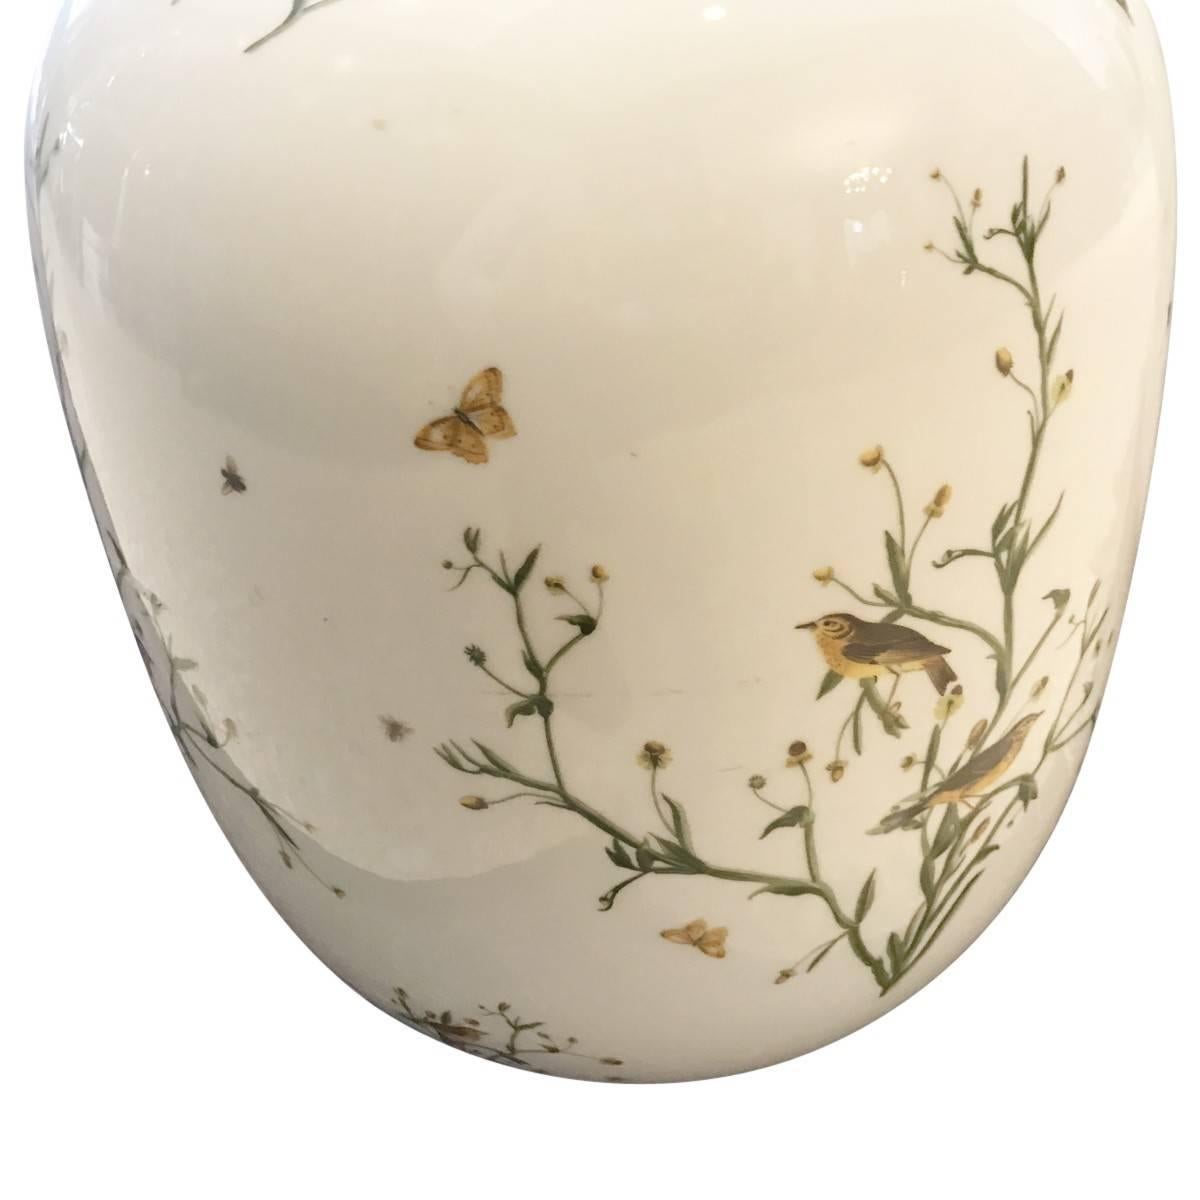 Other Pair of Rosenthal German Porcelain Ovoid Vases For Sale